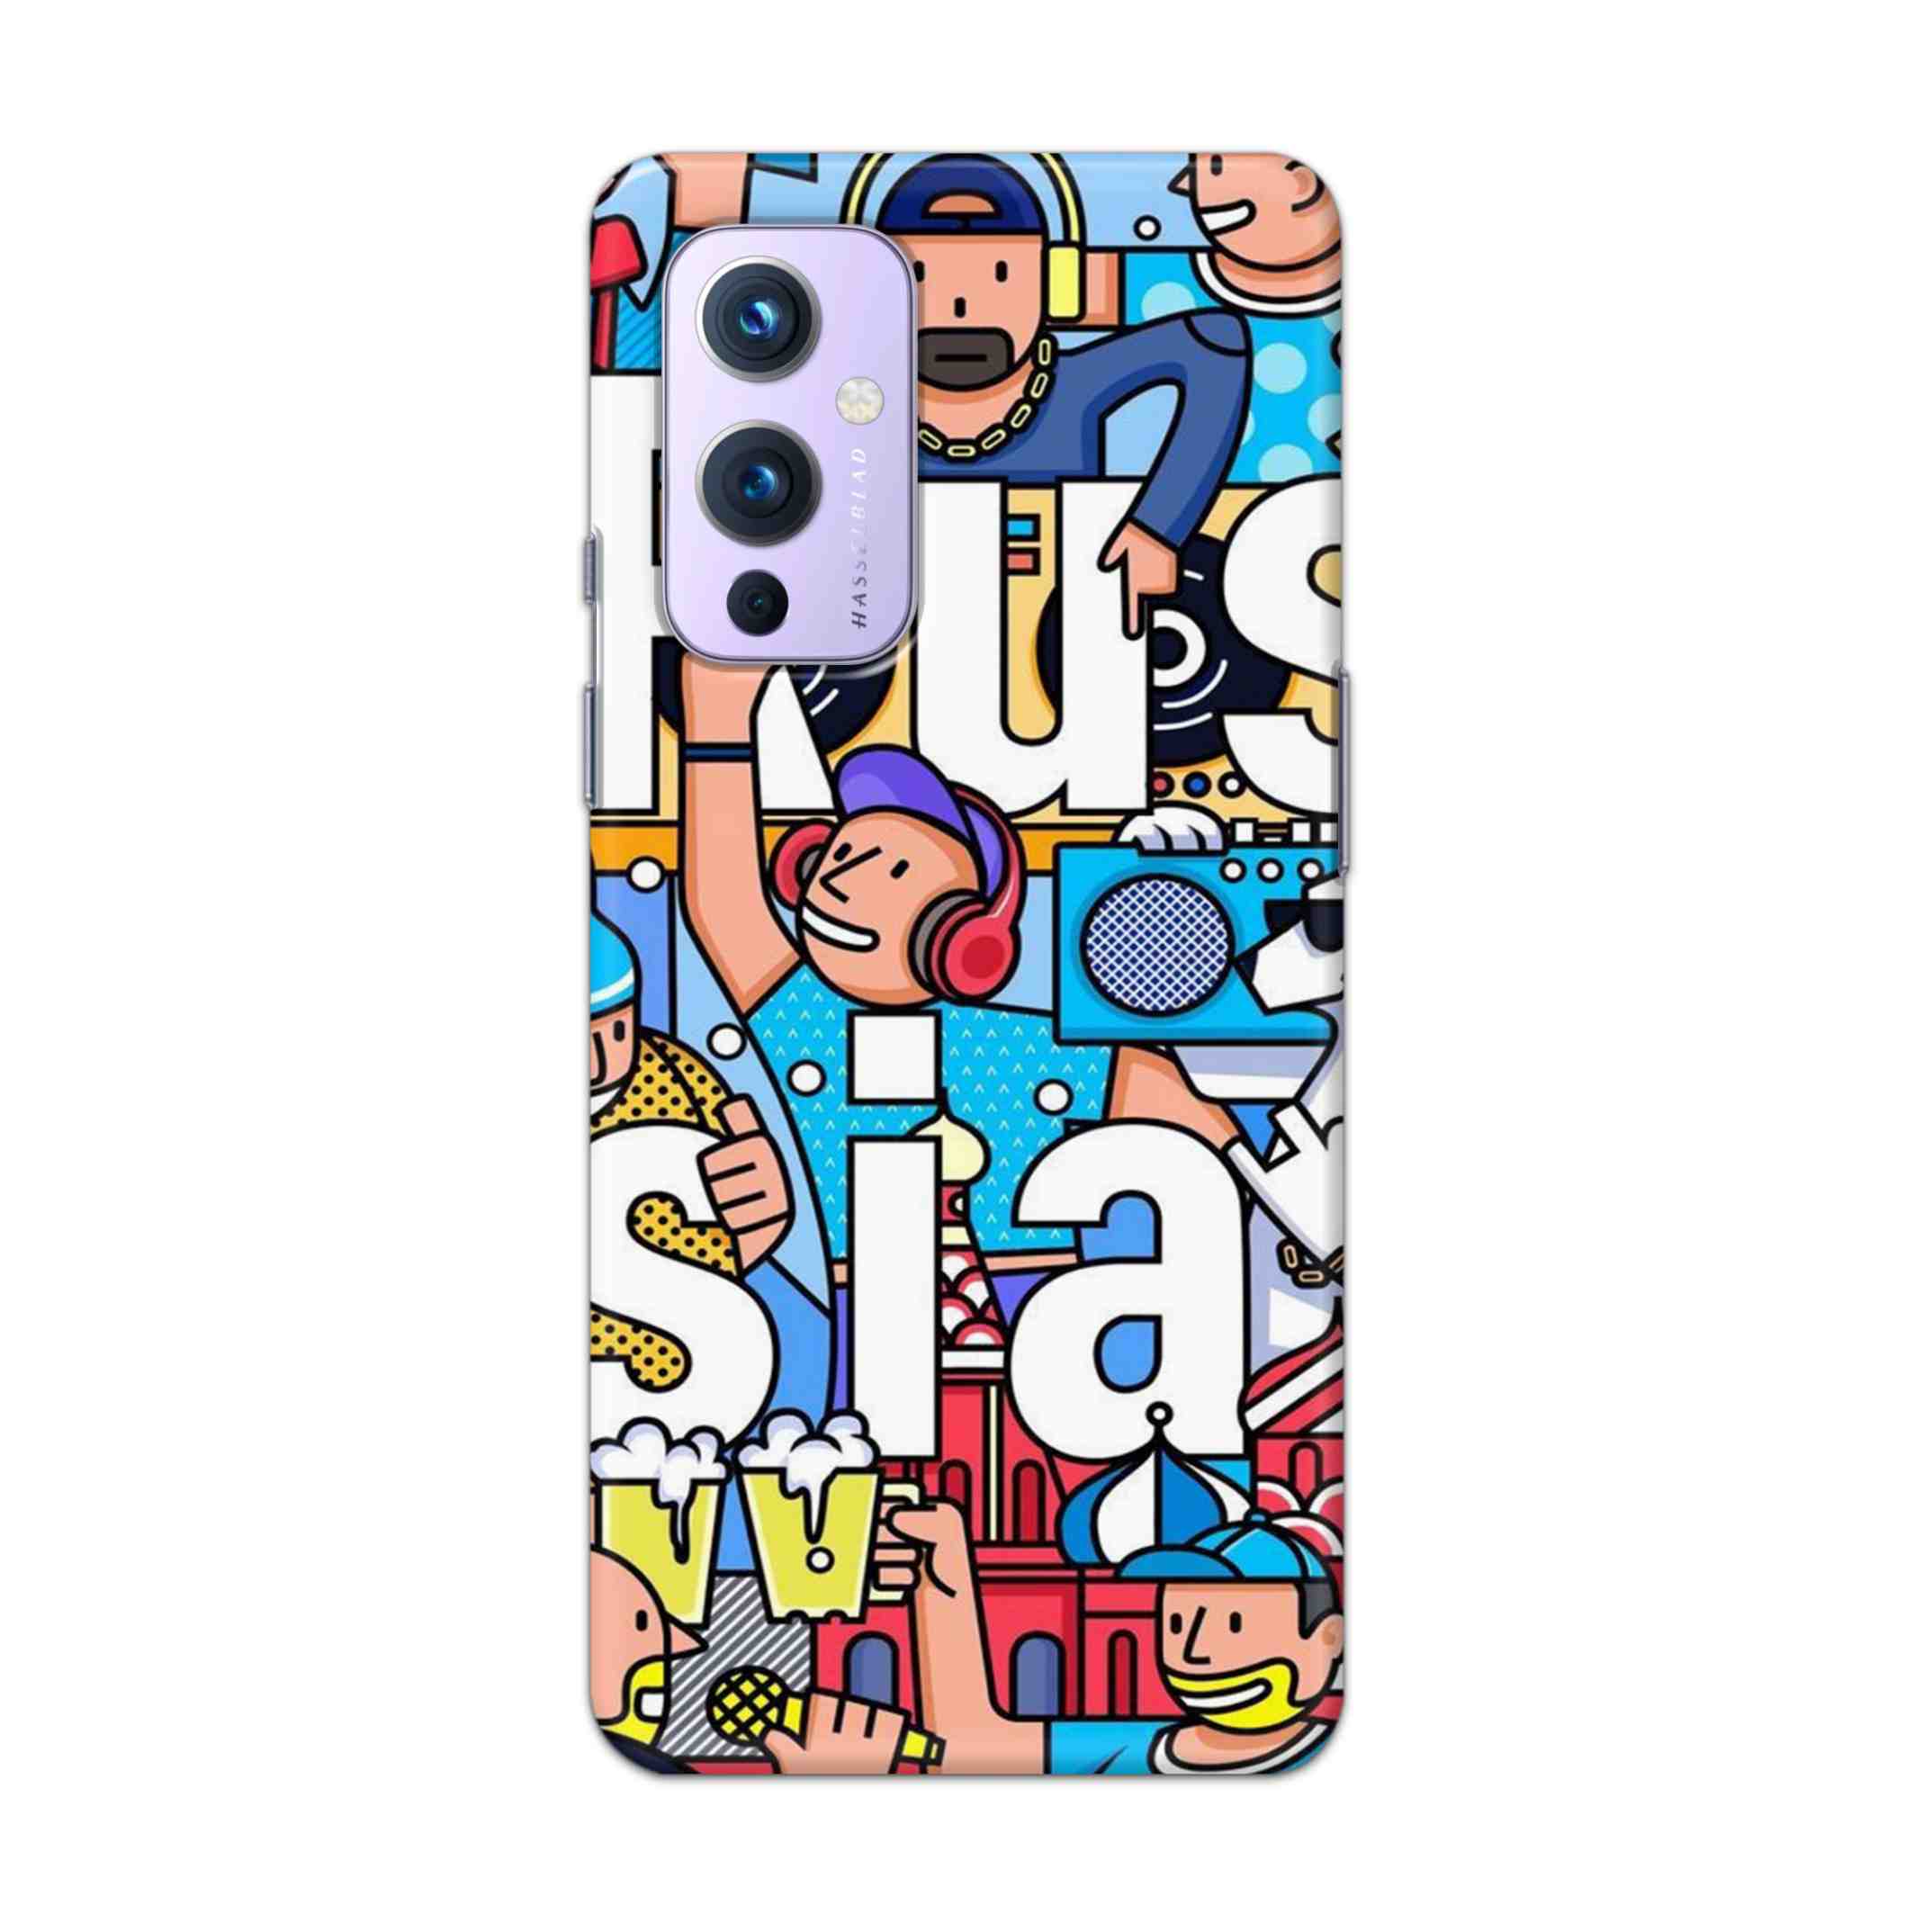 Buy Russia Hard Back Mobile Phone Case Cover For OnePlus 9 Online